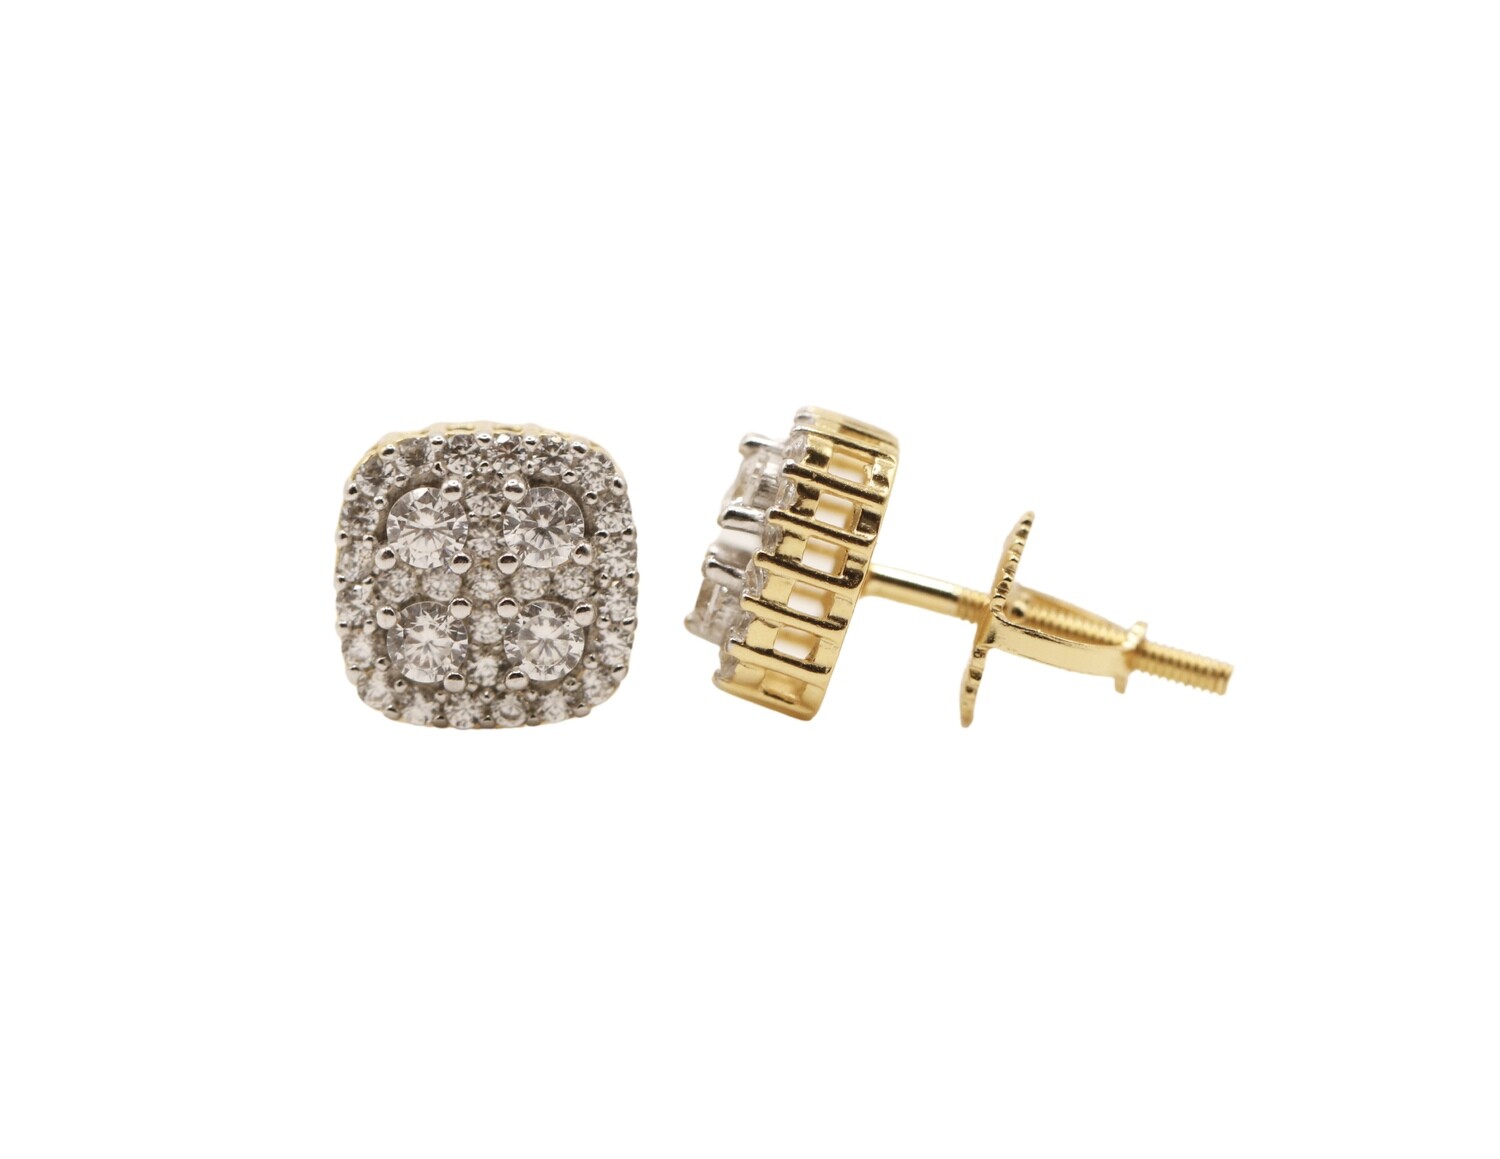 Curved Square Silver Gold Finish CZ Earrings